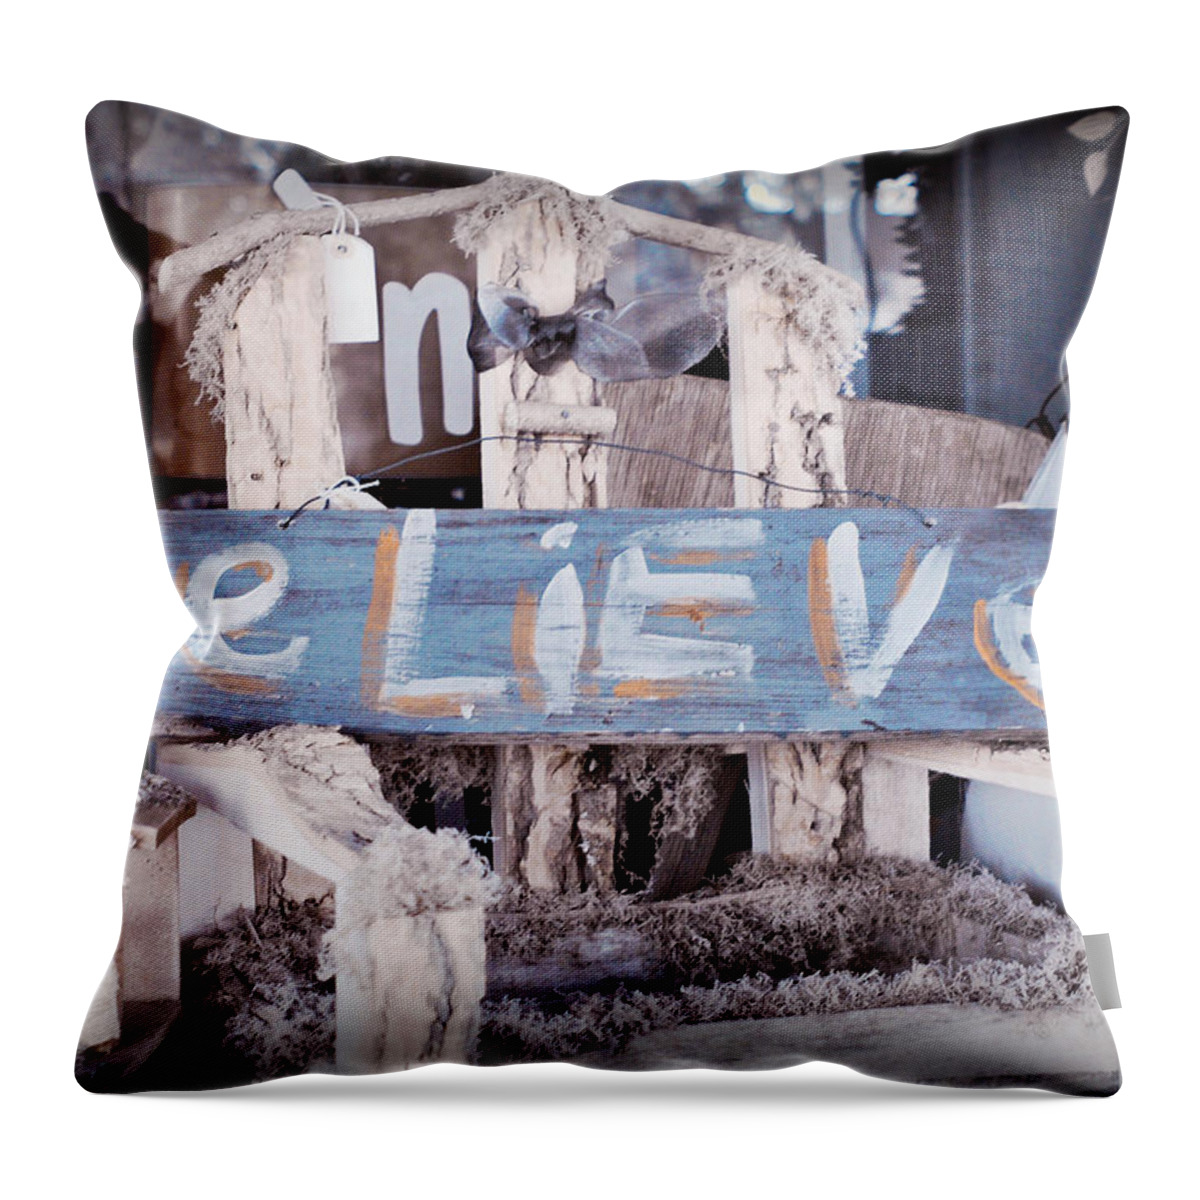 Greeting Throw Pillow featuring the photograph Believe by Joye Ardyn Durham